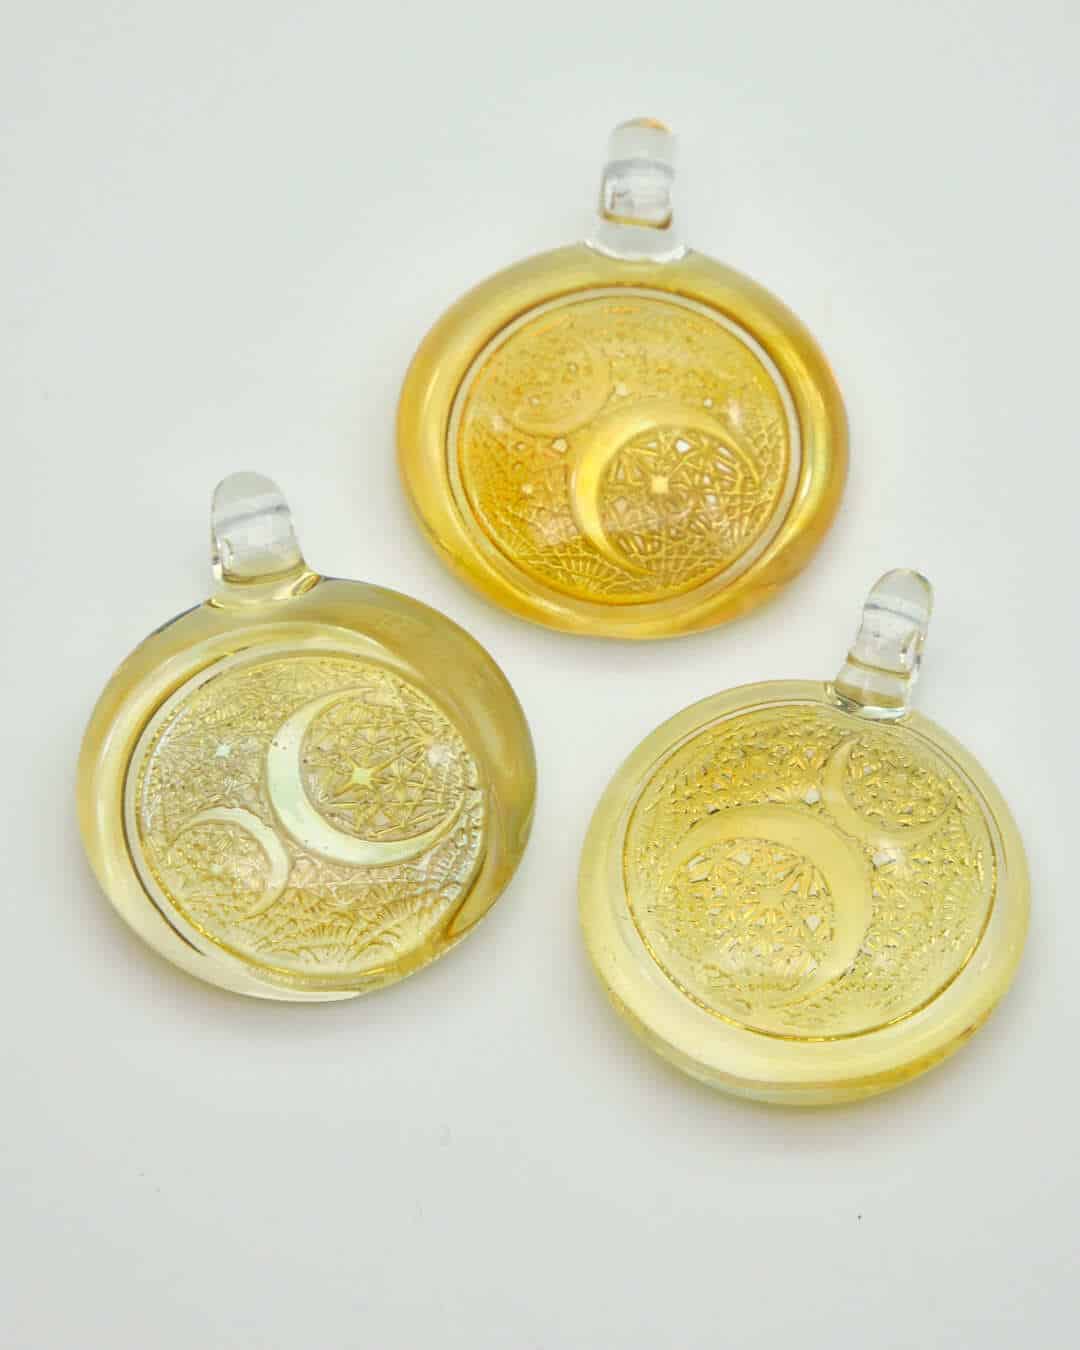 meticulously crafted glass pendant - Crescent Moon Pendant by Jolex